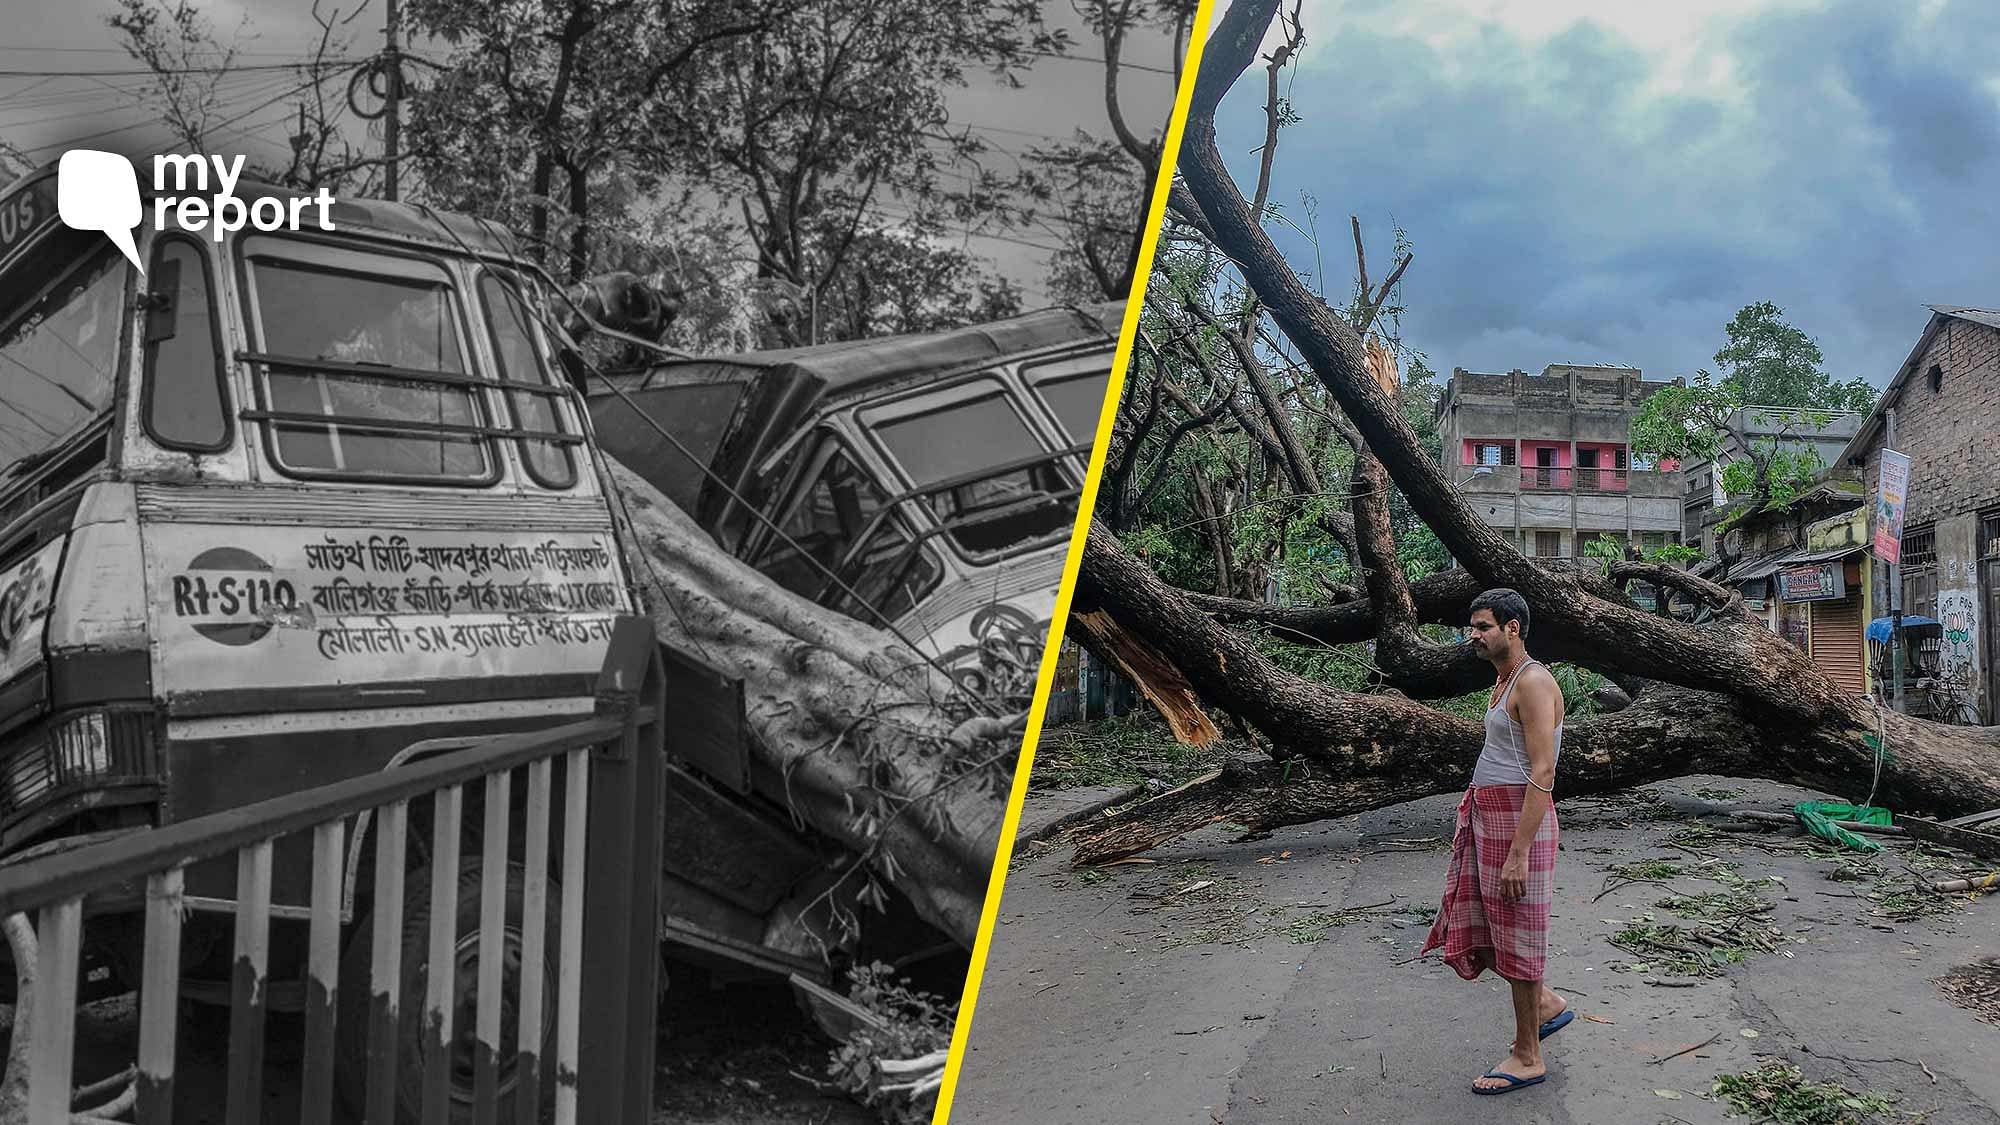 I along with my friend Koushik decided to travel across the city to capture the impact of the cyclone.